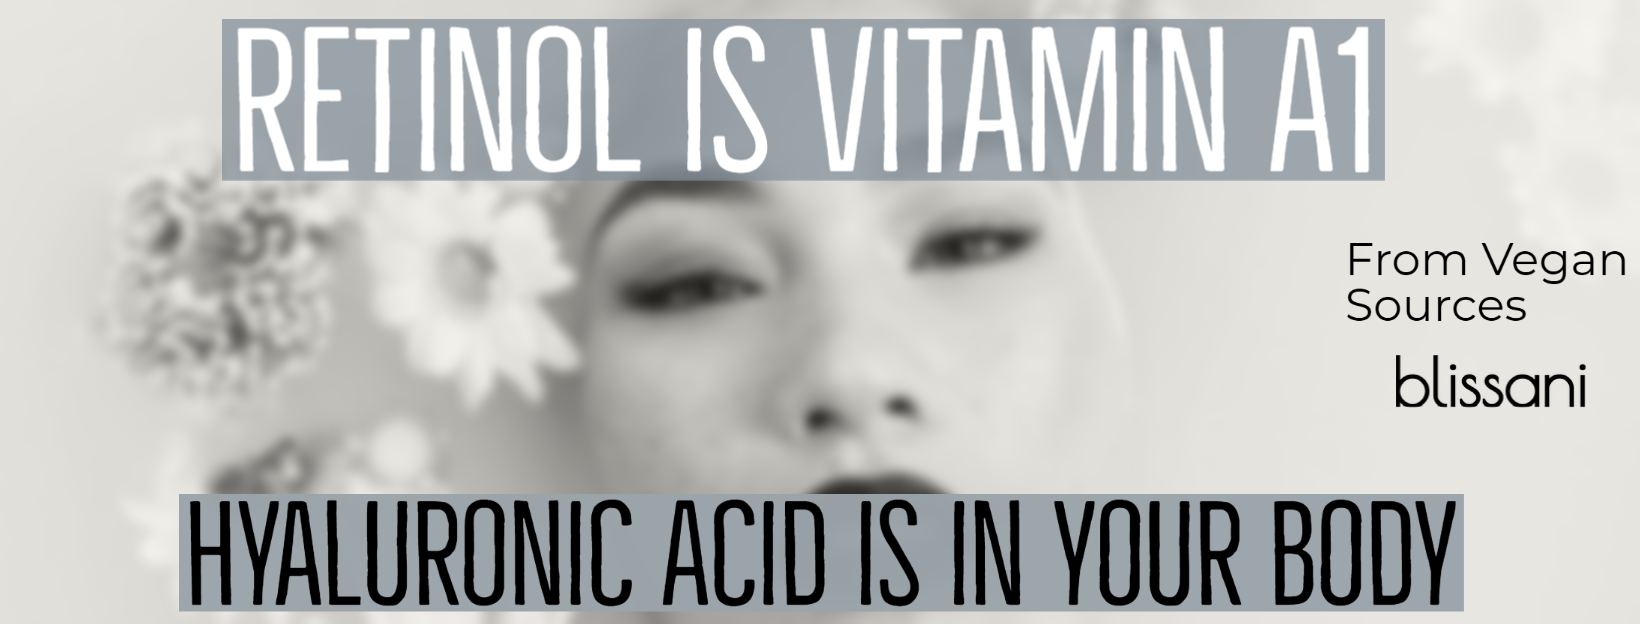 Retinol is Vitamin A1 Hyaluronic Acid is in your body